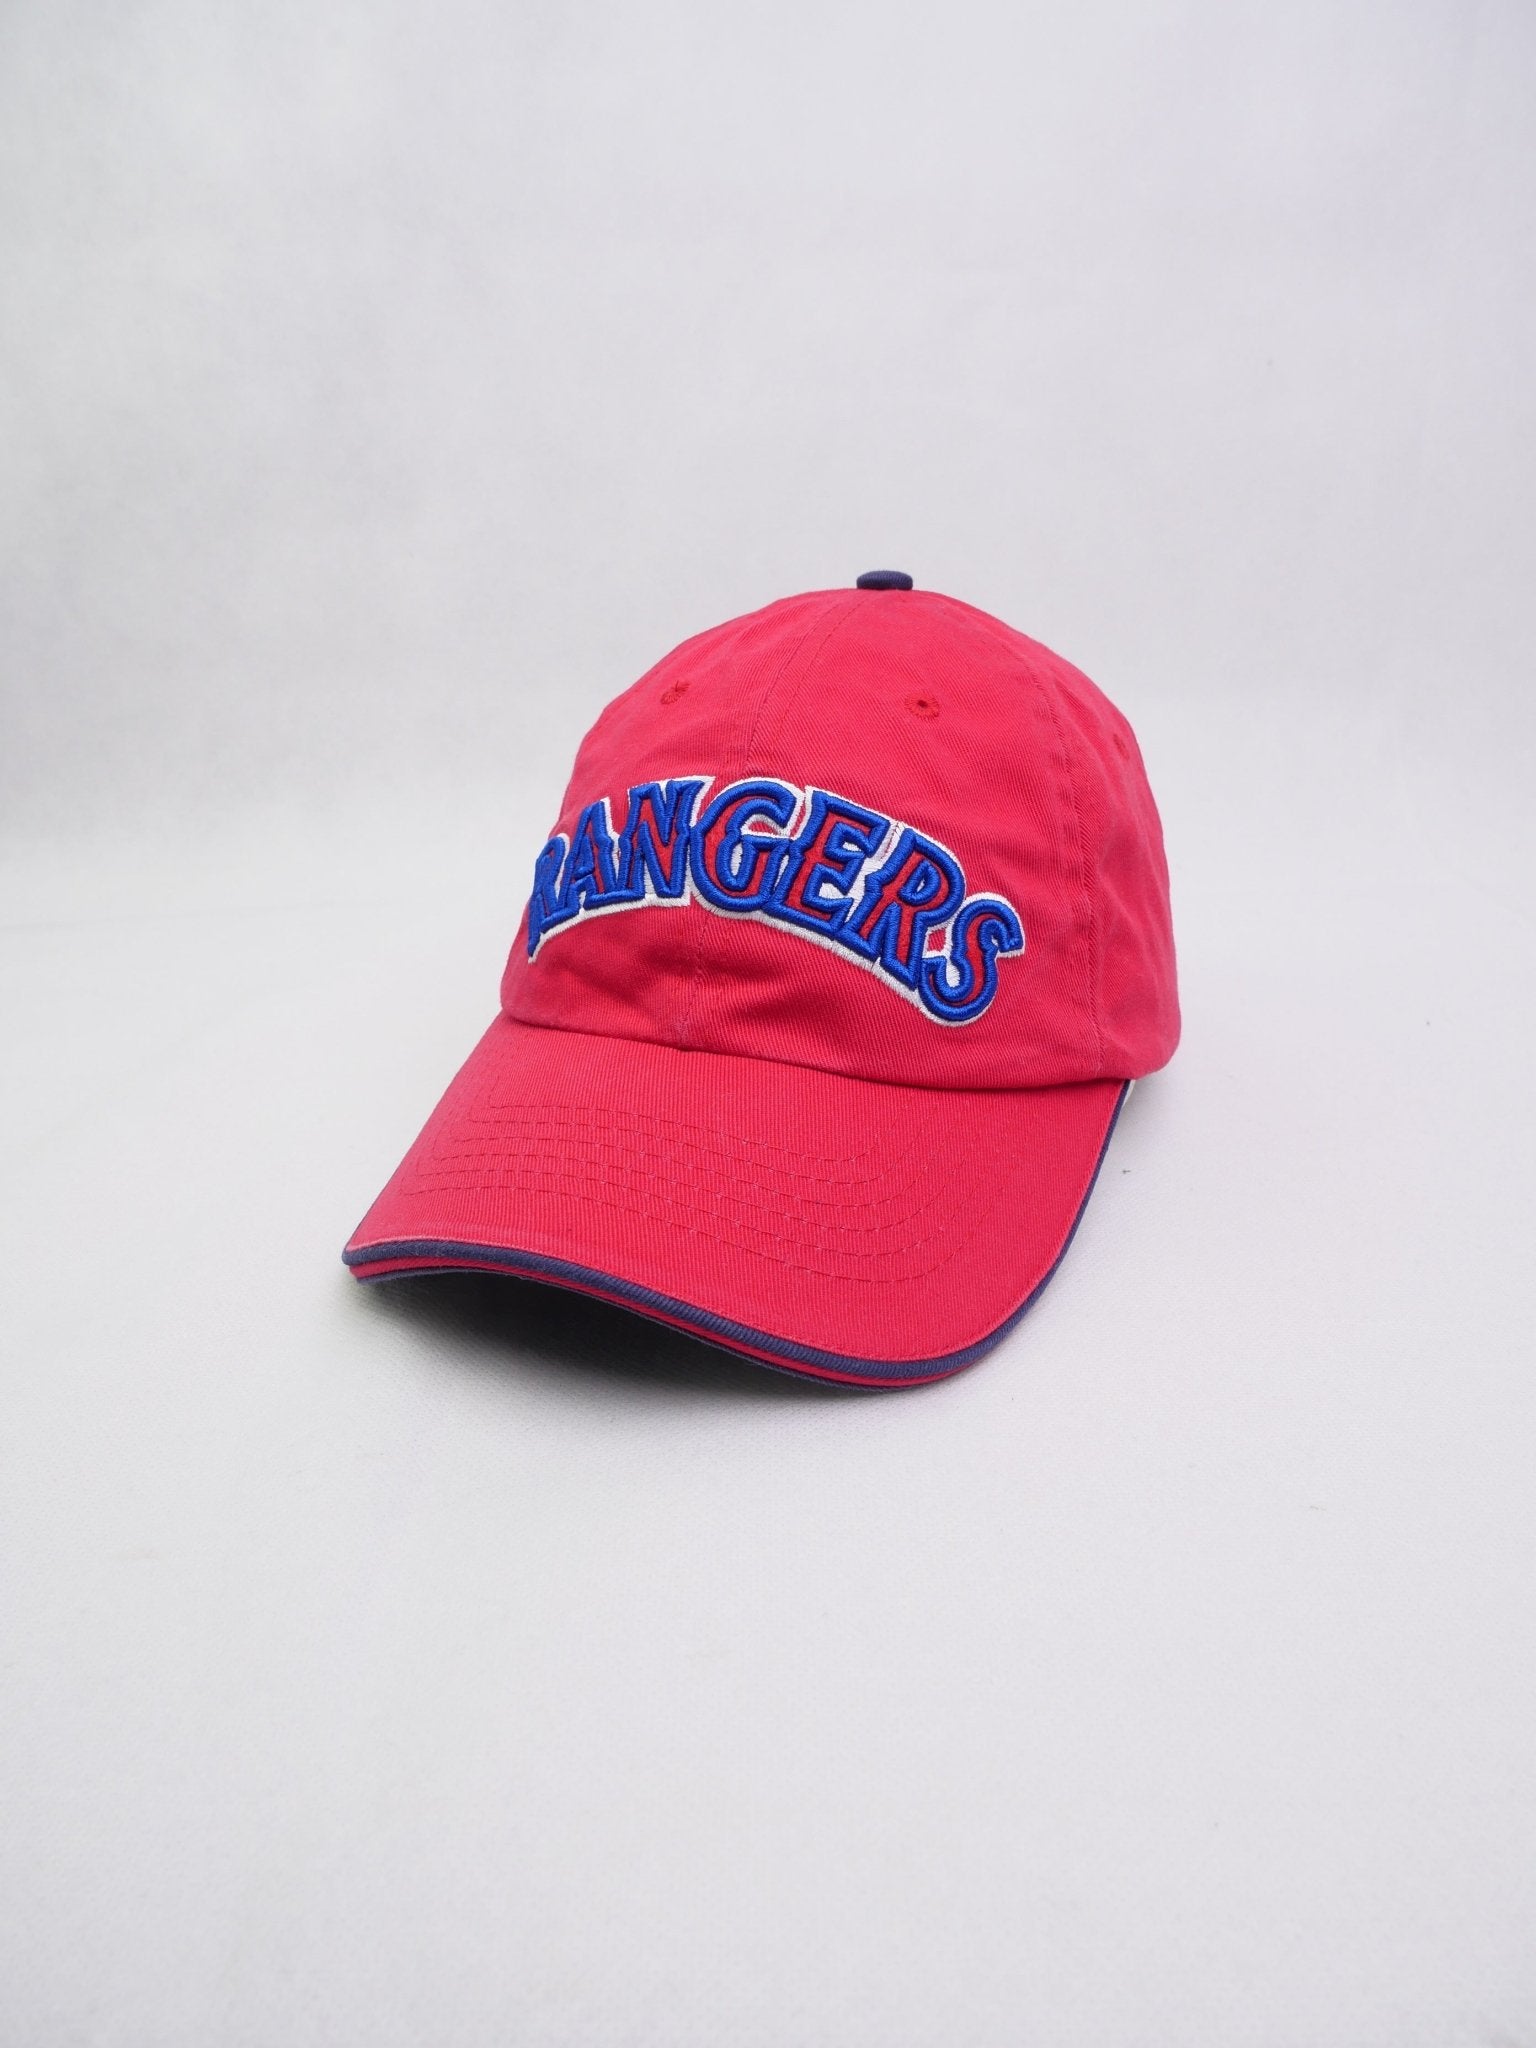 MLB 'Texas Rangers' embroidered Spellout red Cap Accessoire - Peeces